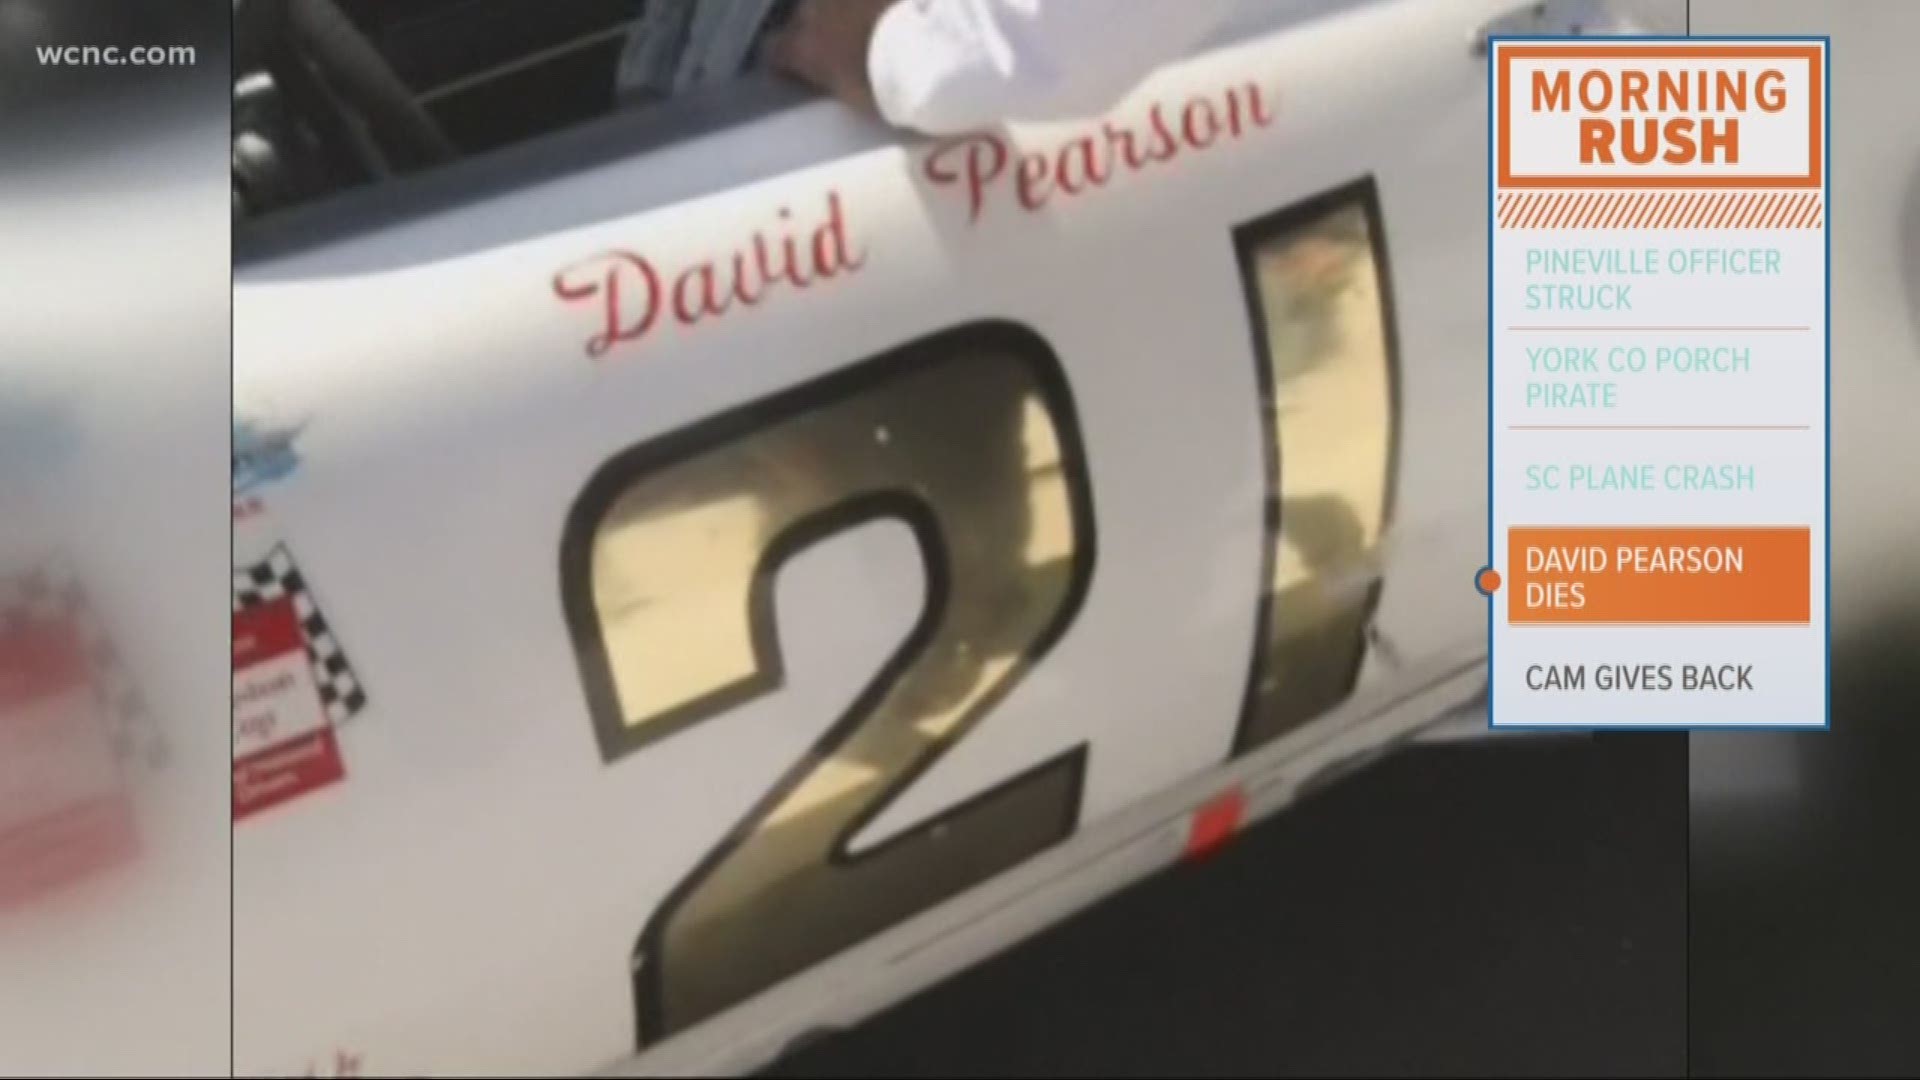 NASCAR Hall of Fame driver David Pearson passed away at his home at the age of 83. During his career, Pearson ranks second in all-time wins at NASCAR's top level with 105 victories.